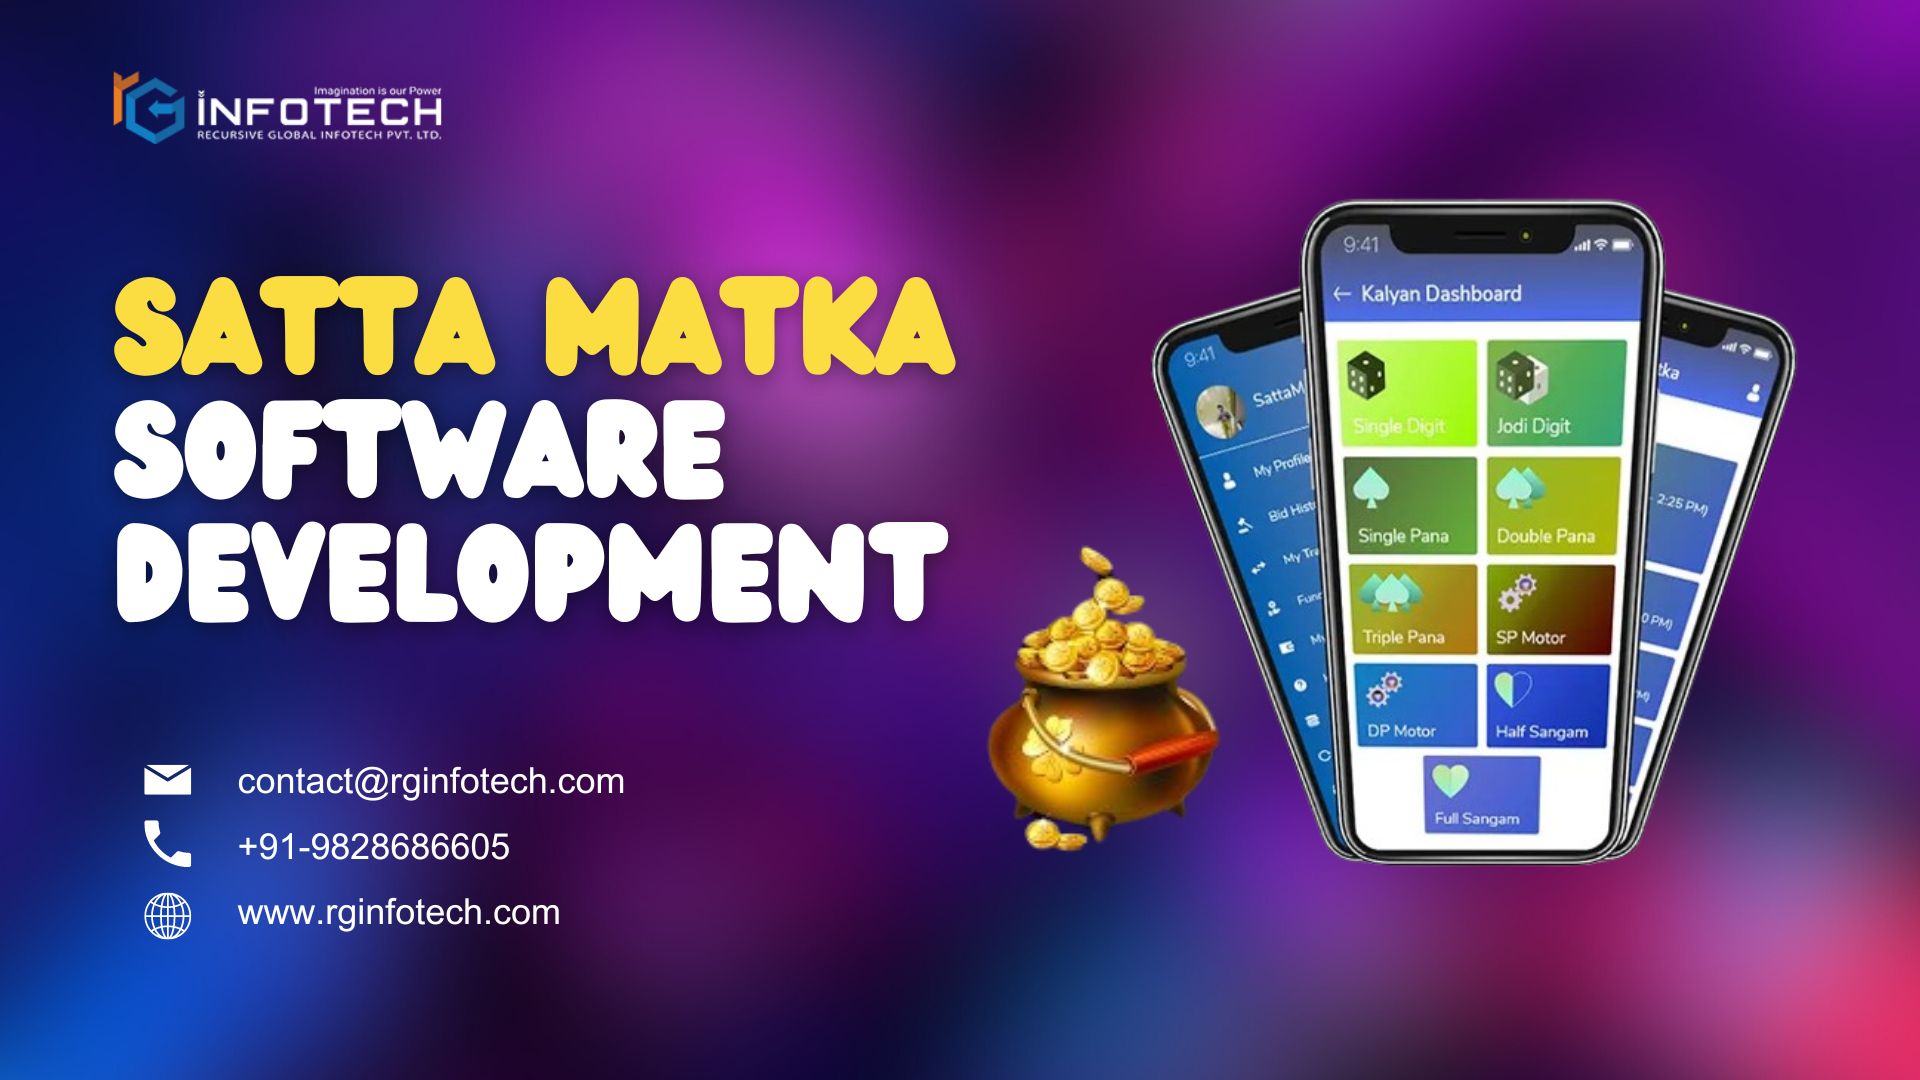 Boost your Satta Matka gaming platform with our specialized Satta Matka software development services. Our expert developers create user-friendly interfaces and robust backend systems for seamless gameplay, secure transactions, and efficient platform management. Explore the potential of your venture with our bespoke services.

Read More: https://shorturl.at/bEMW4

Call/WhatsApp: +919828686605

Email: sales@rginfotech.com